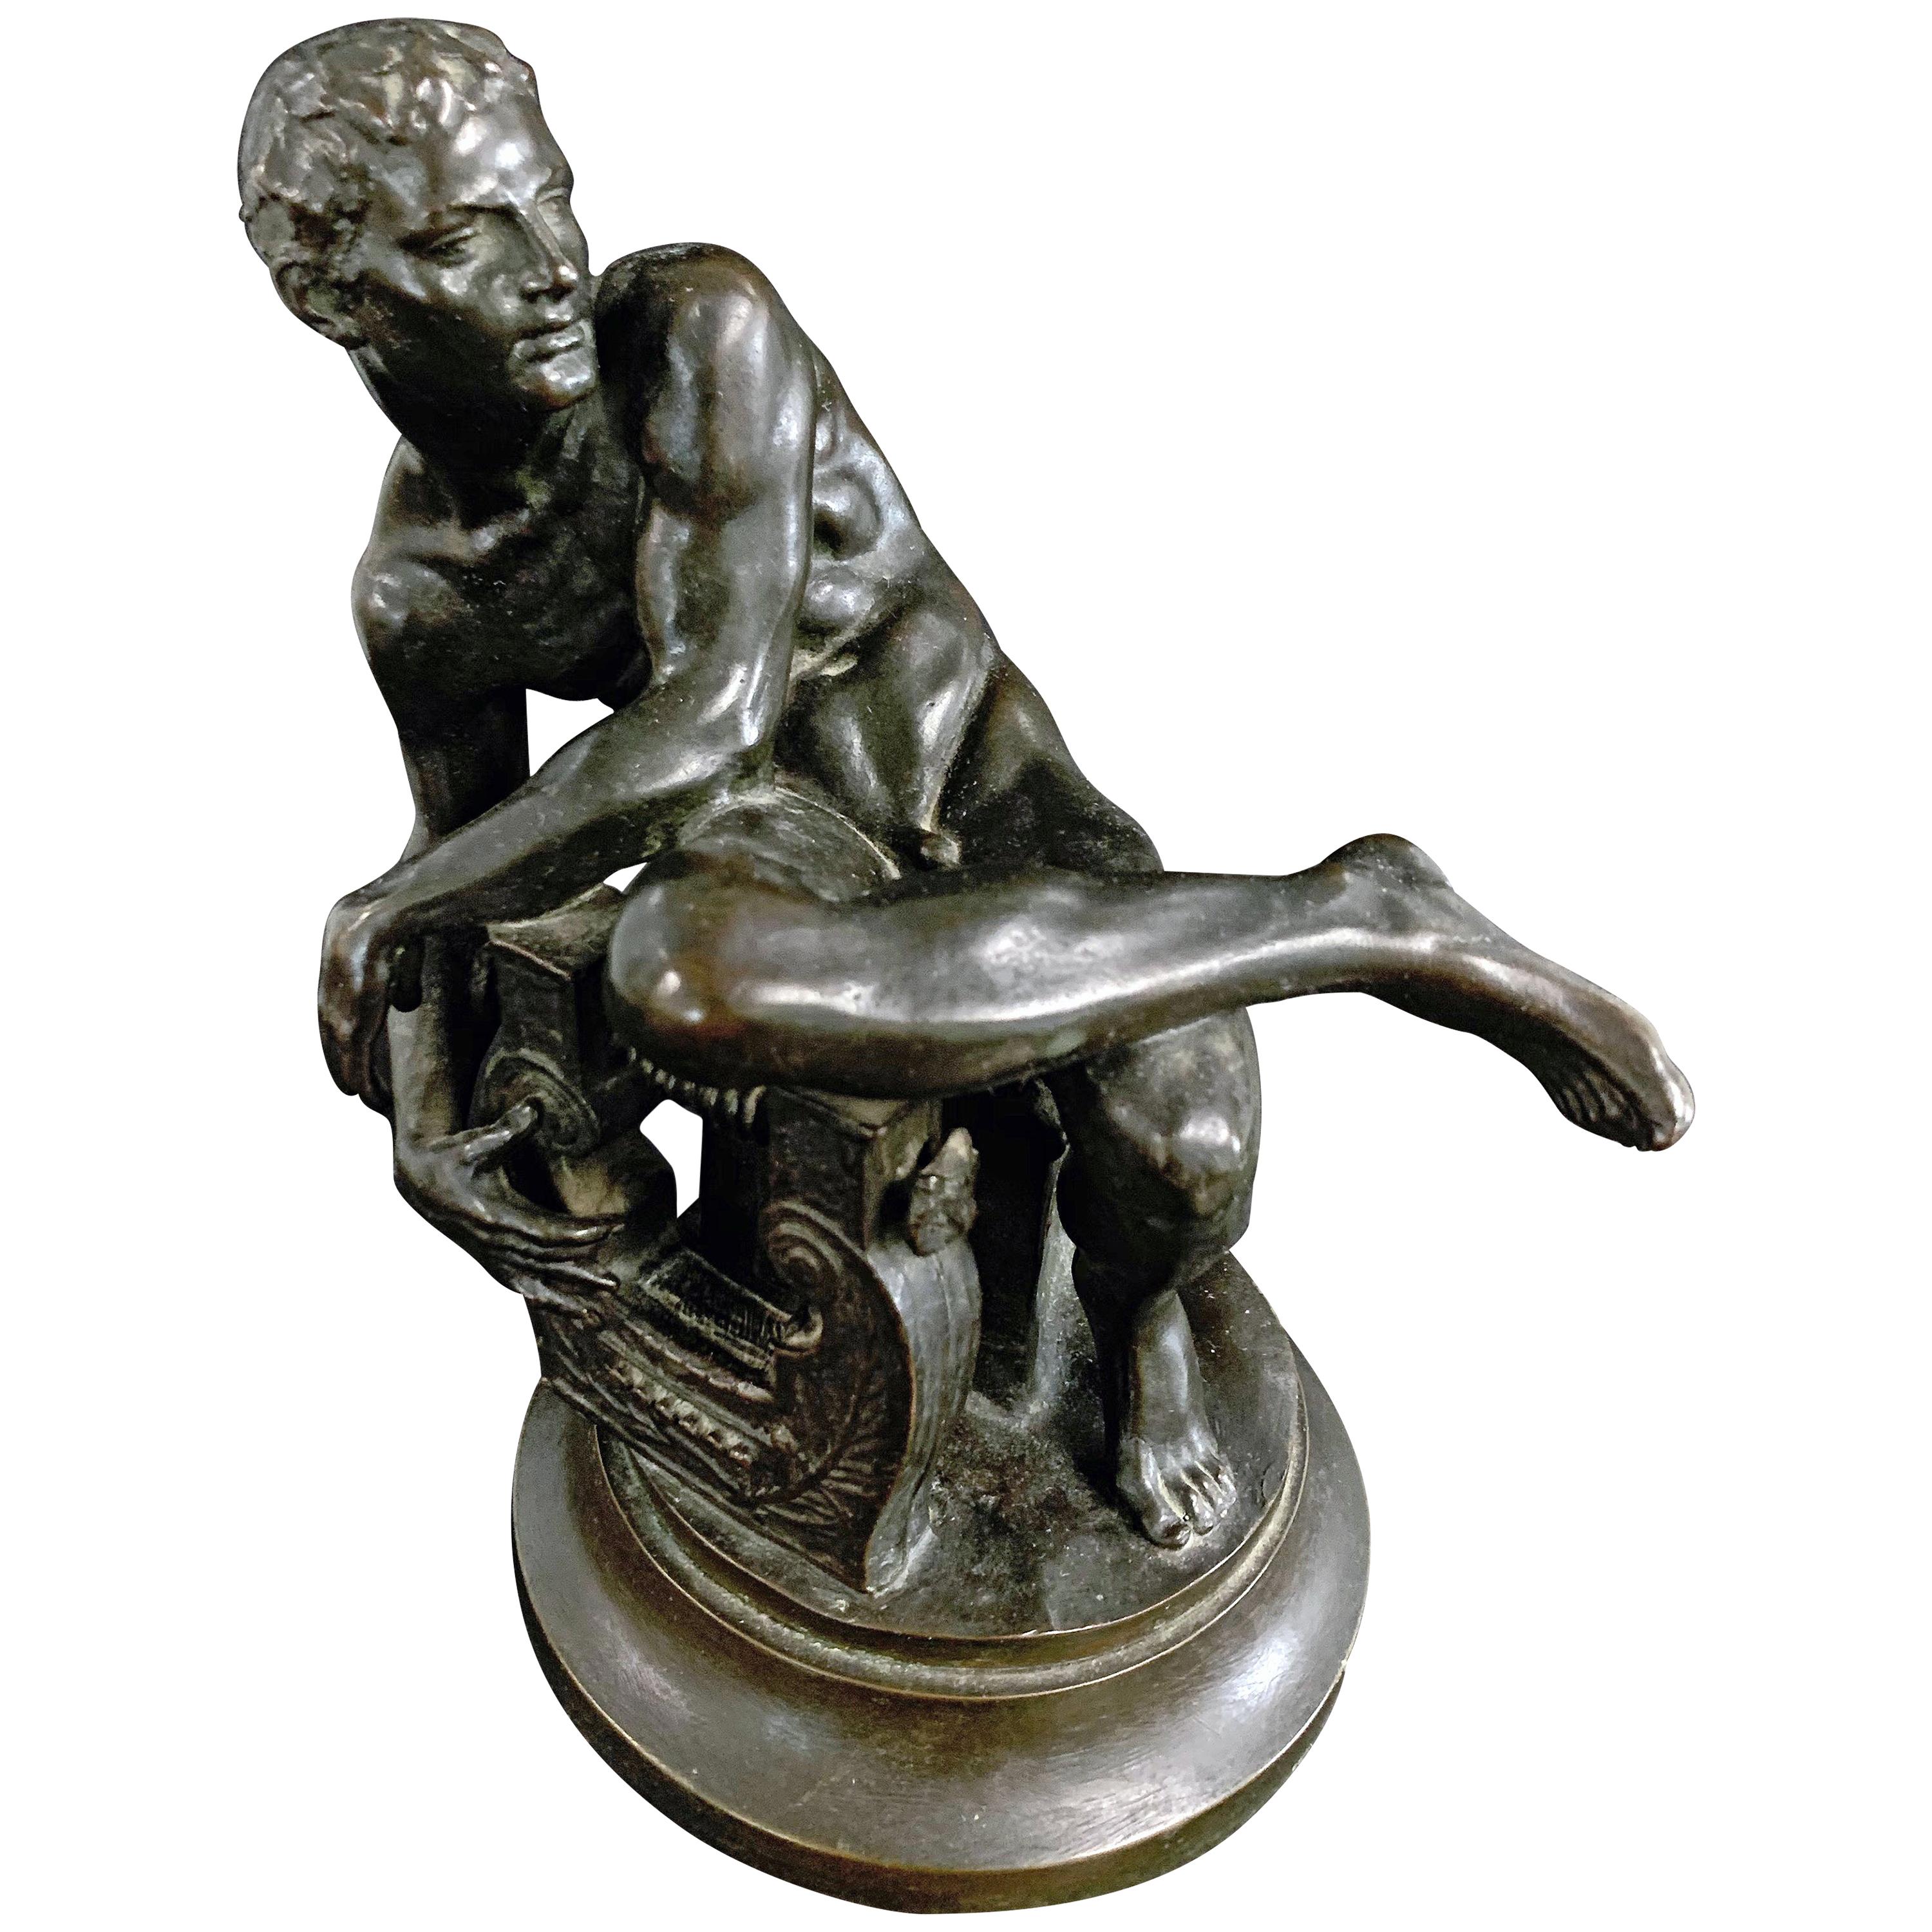 "Nude Male with Lyre," Rare Bronze Sculpture by Cummings, San Francisco Artist